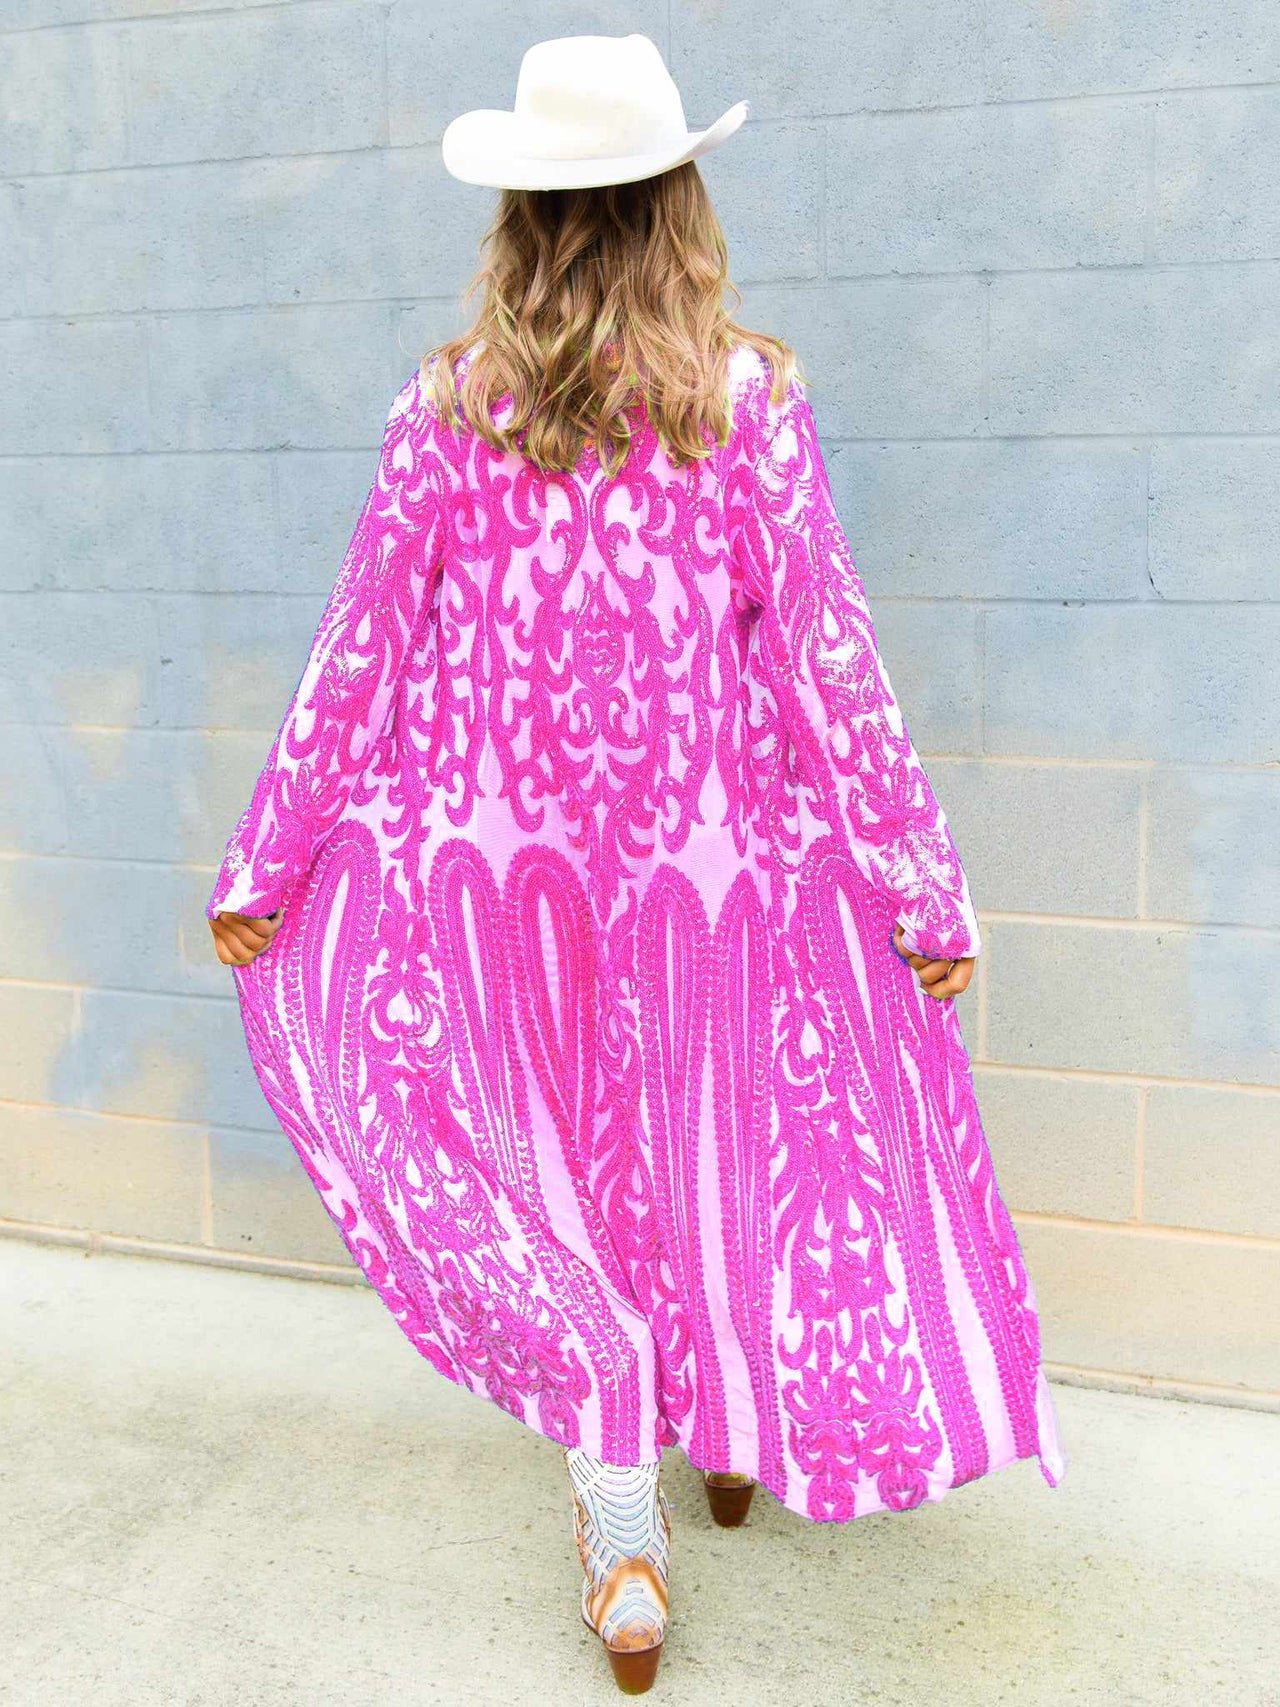 The Royal Sequin Duster - Pink on Beige